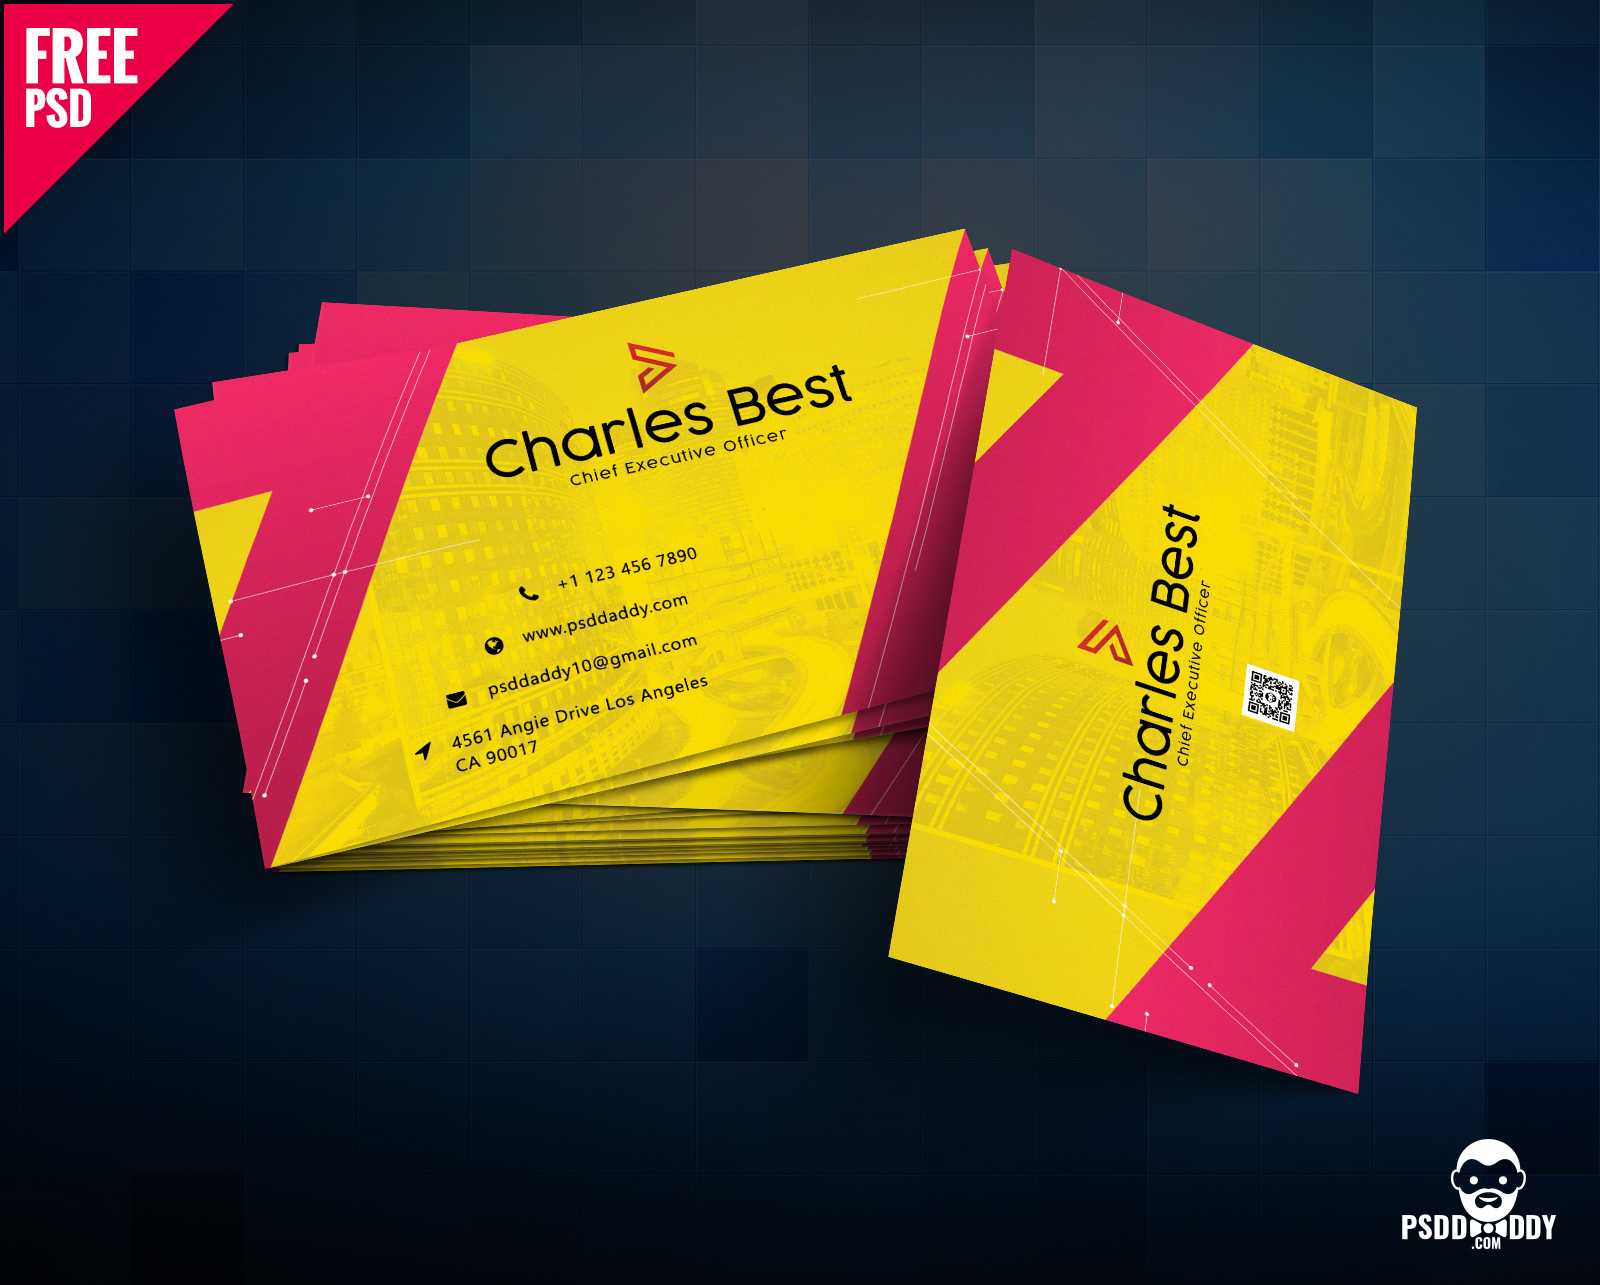 Download] Creative Business Card Free Psd | Psddaddy For Visiting Card Template Psd Free Download